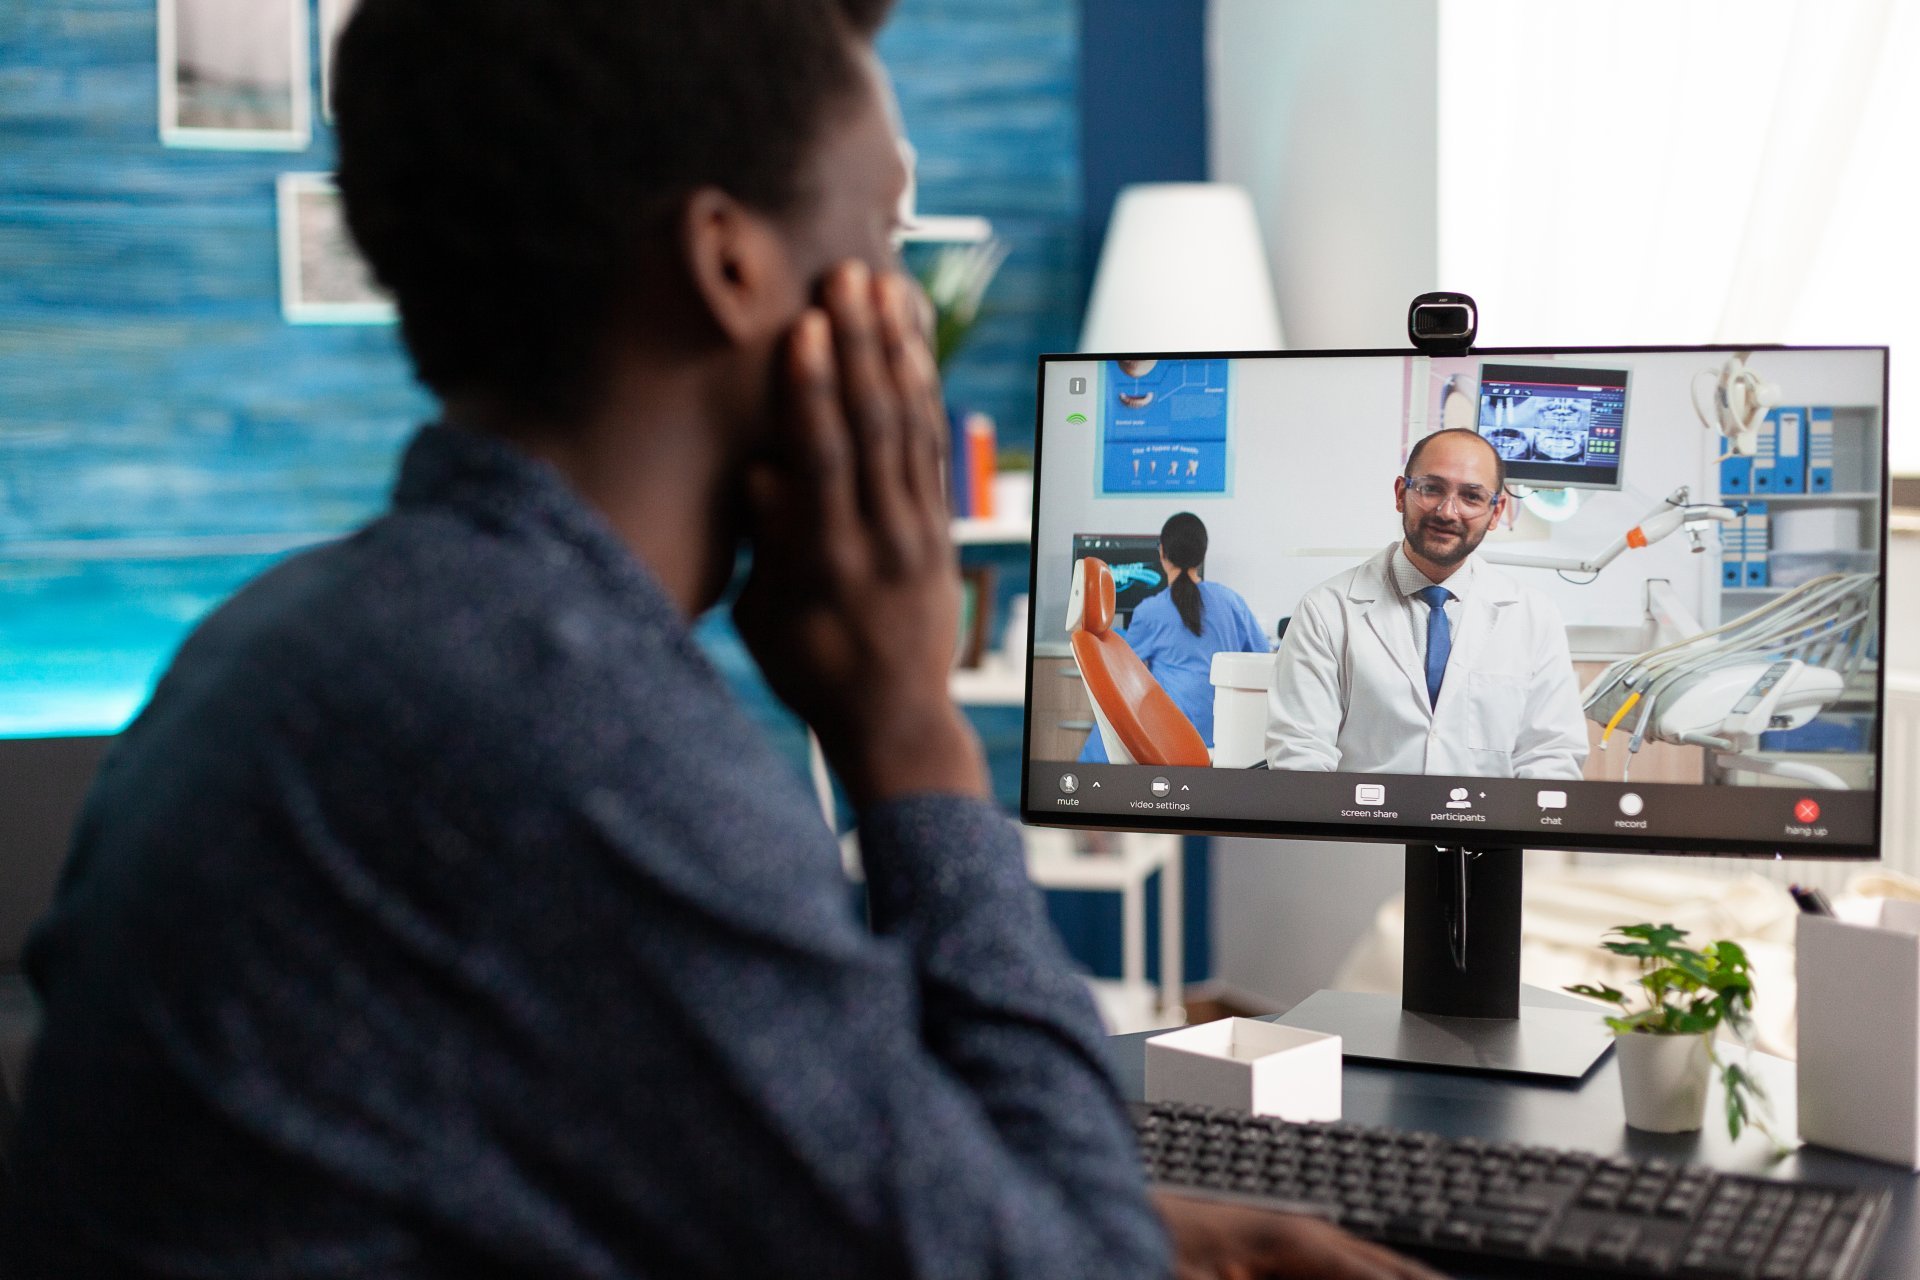 A young man communicates with his doctor during a remote telehealth visit.